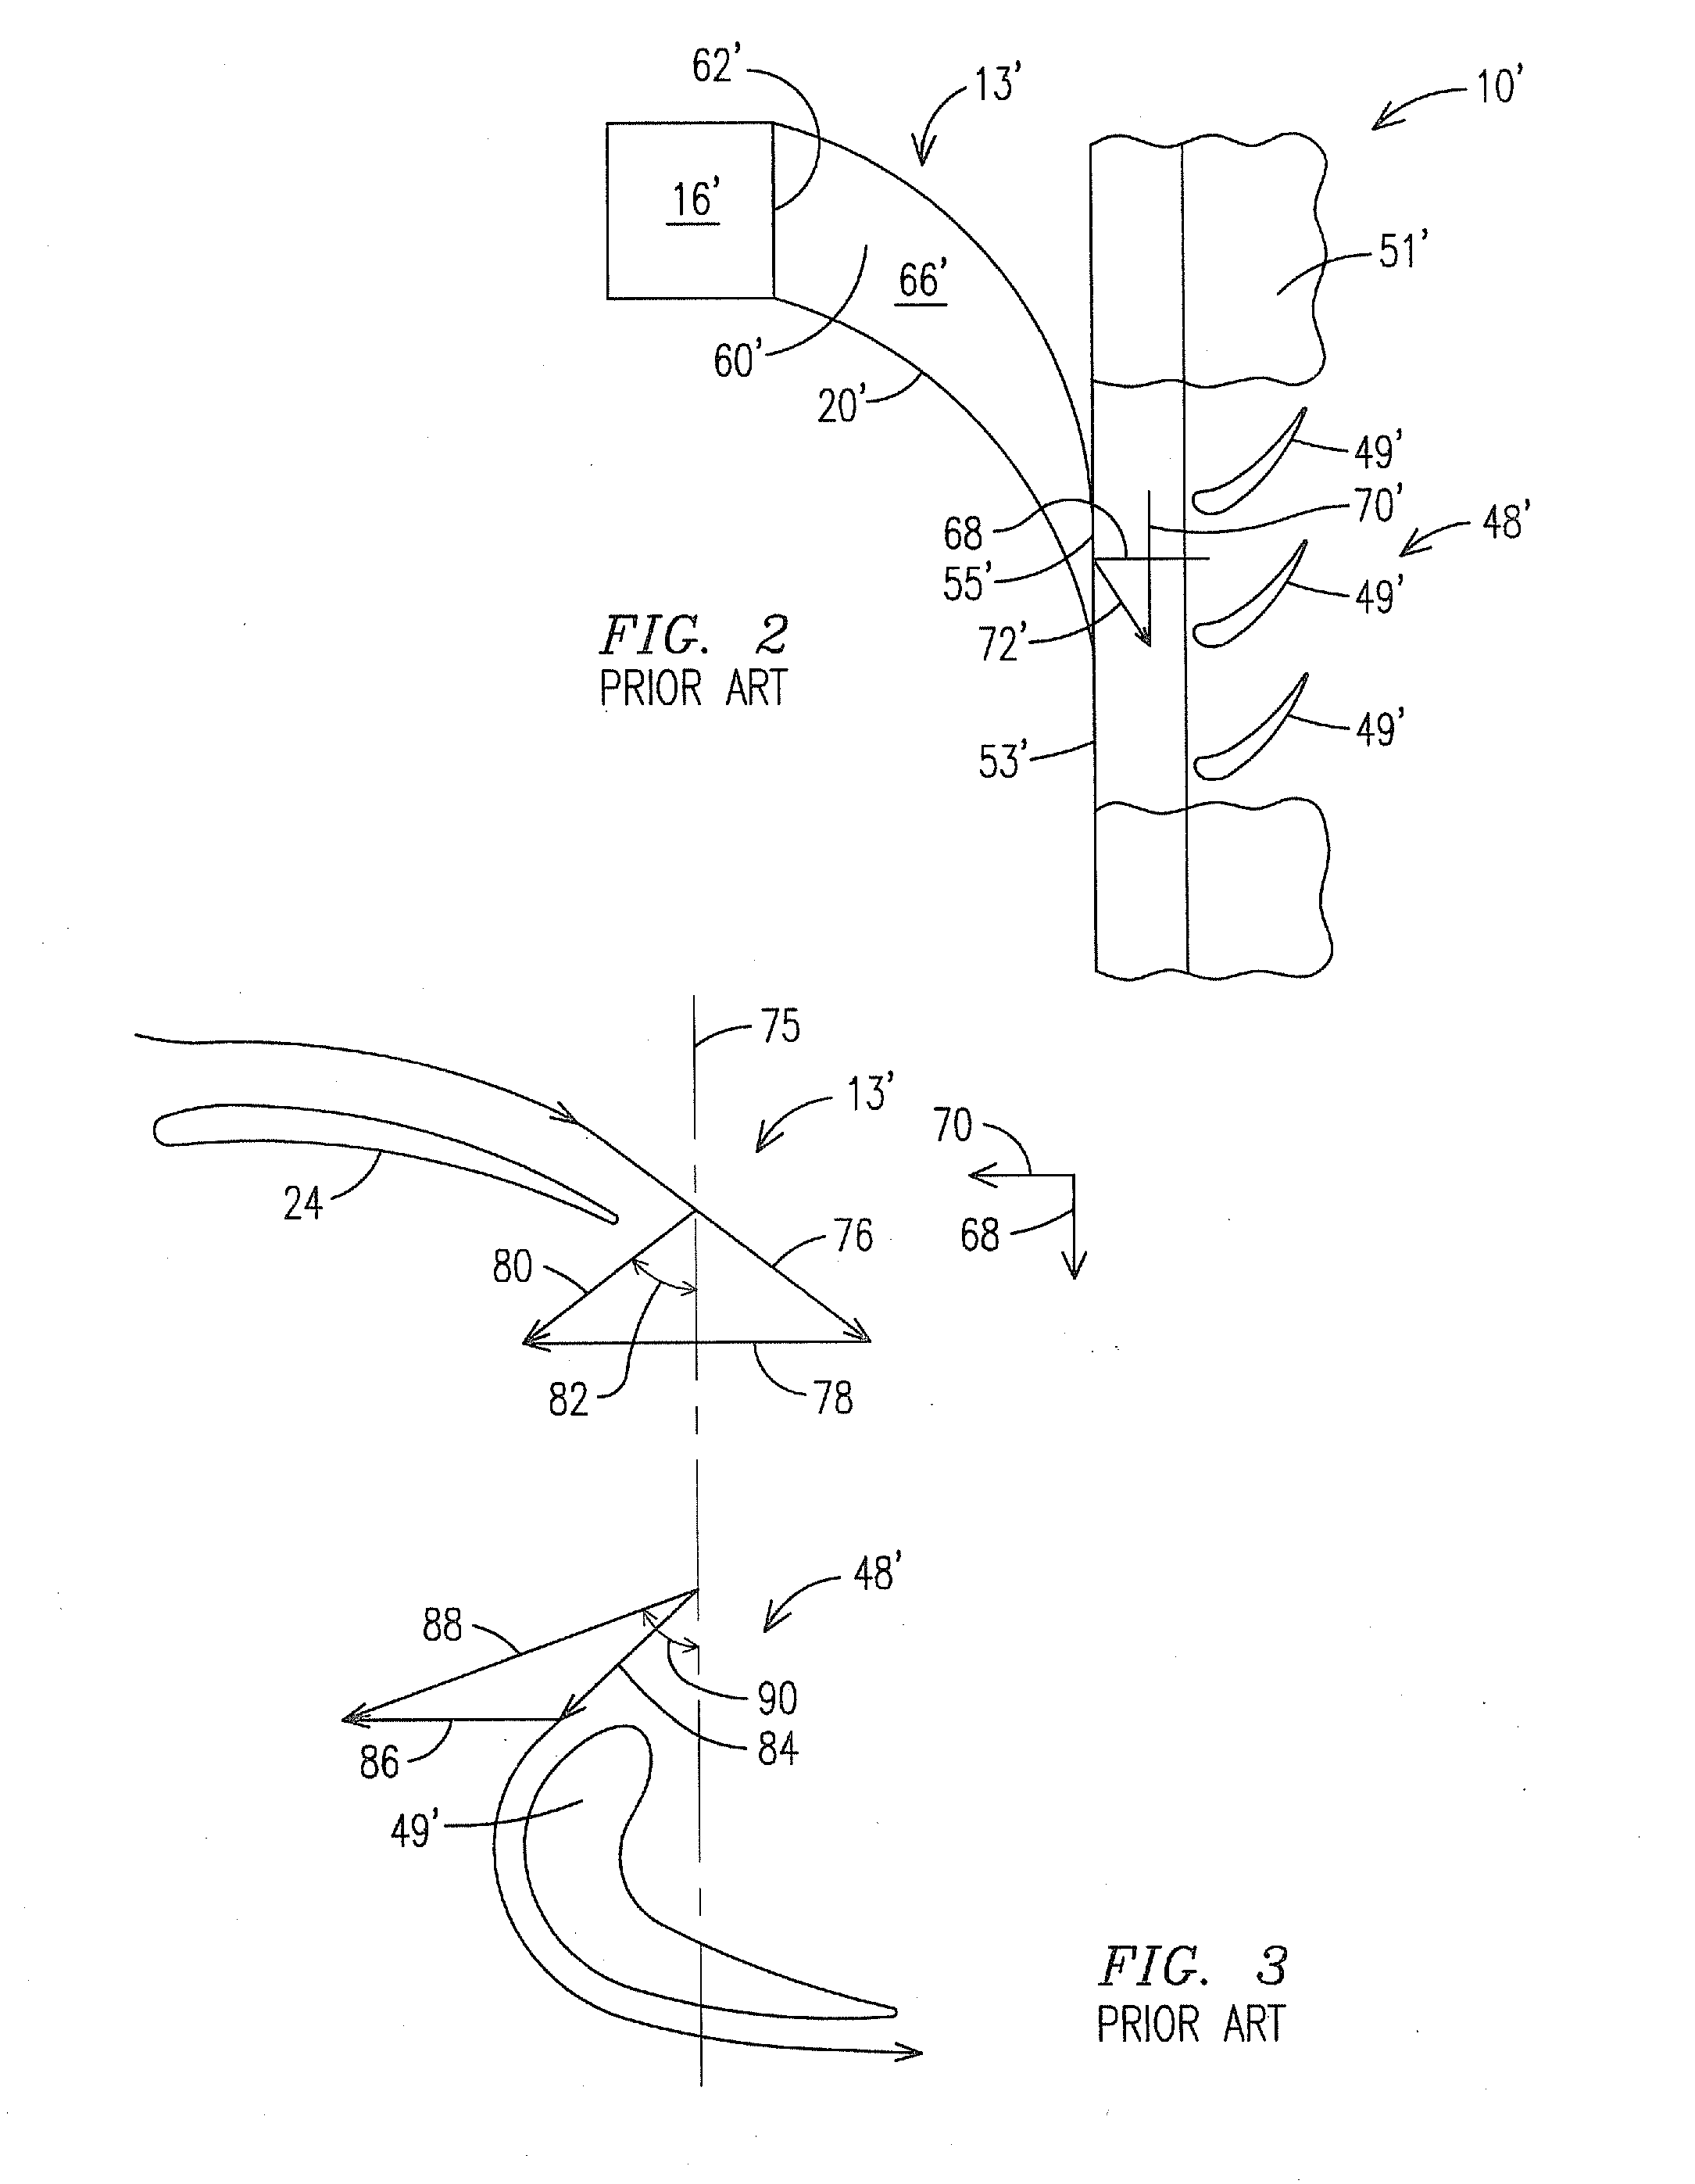 Mid-section of a can-annular gas turbine engine with an improved rotation of air flow from the compressor to the turbine